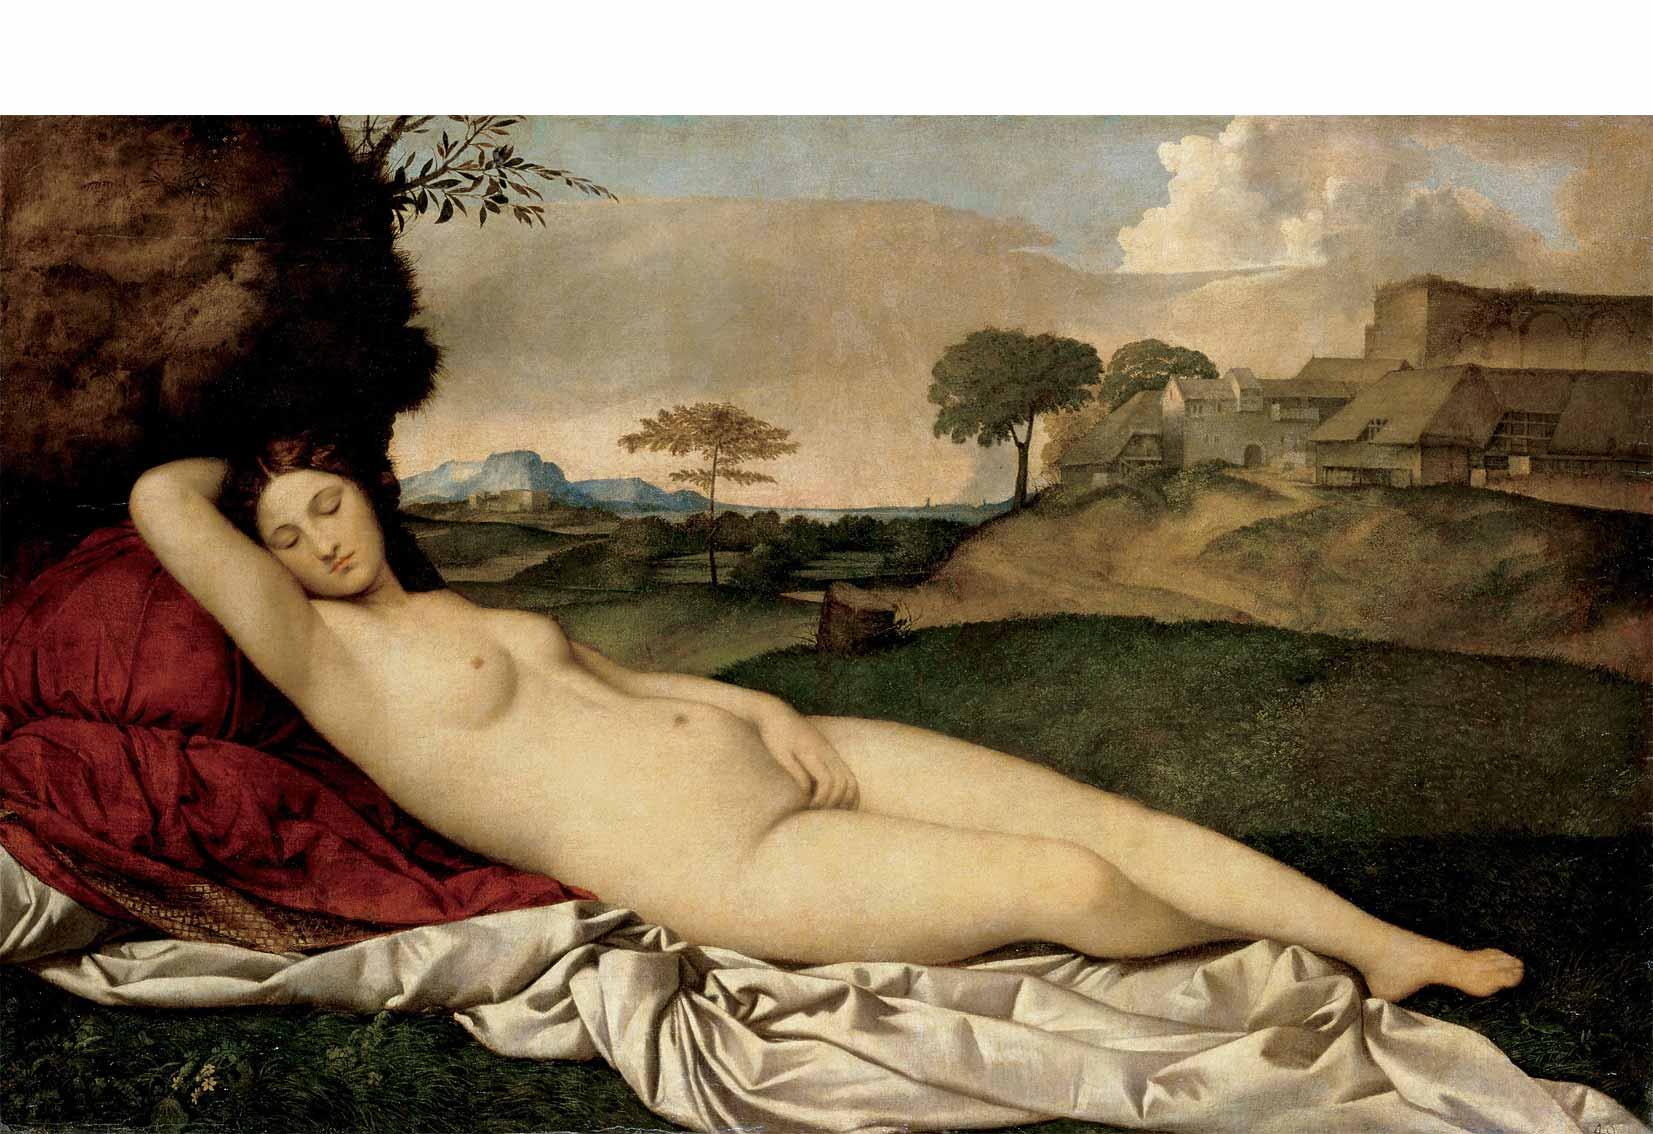 Giorgione, completed by Titian, Sleeping Venus, c. 1510.